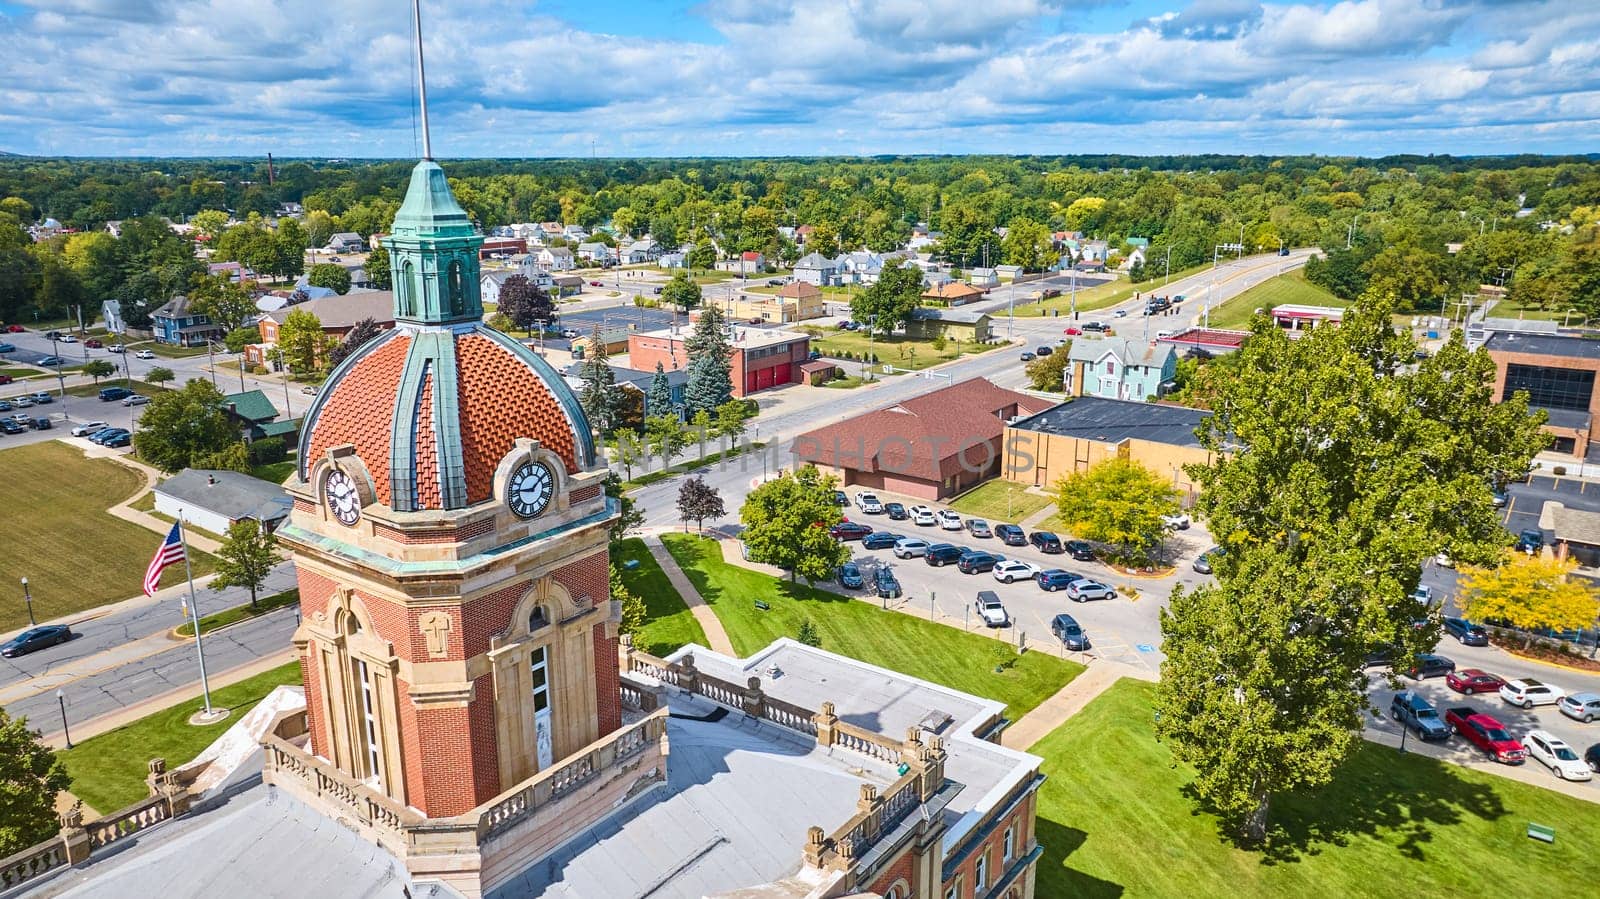 Aerial view of Elkhart County Courthouse showcasing its intricate dome architecture and surrounding small town atmosphere in Goshen, Indiana, captured by a DJI Mavic 3 drone